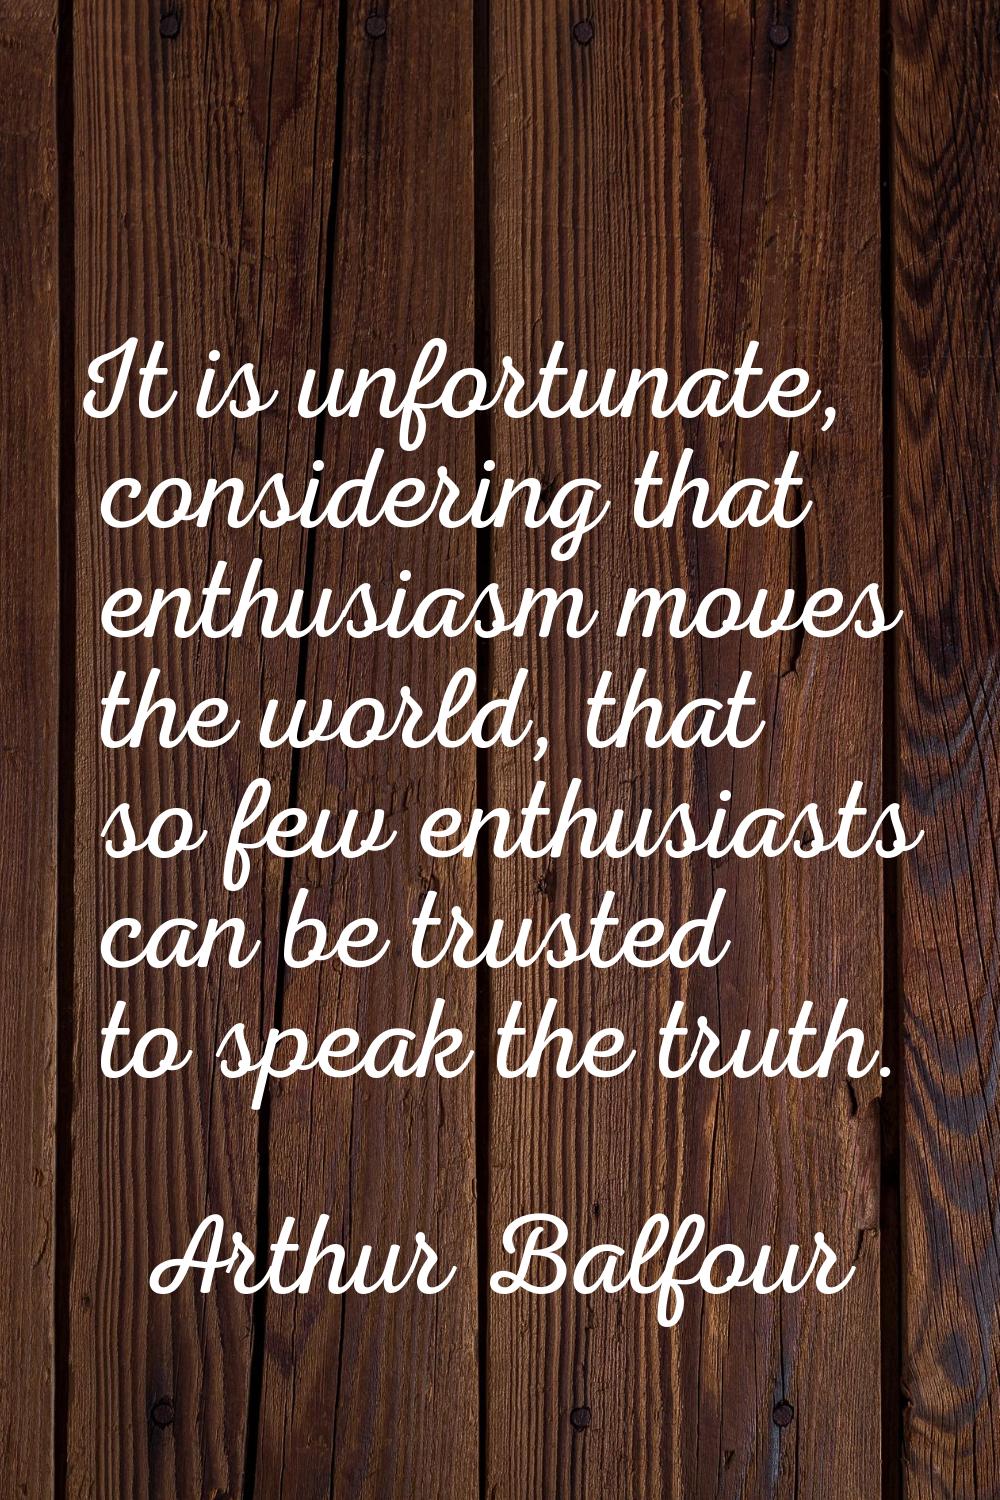 It is unfortunate, considering that enthusiasm moves the world, that so few enthusiasts can be trus